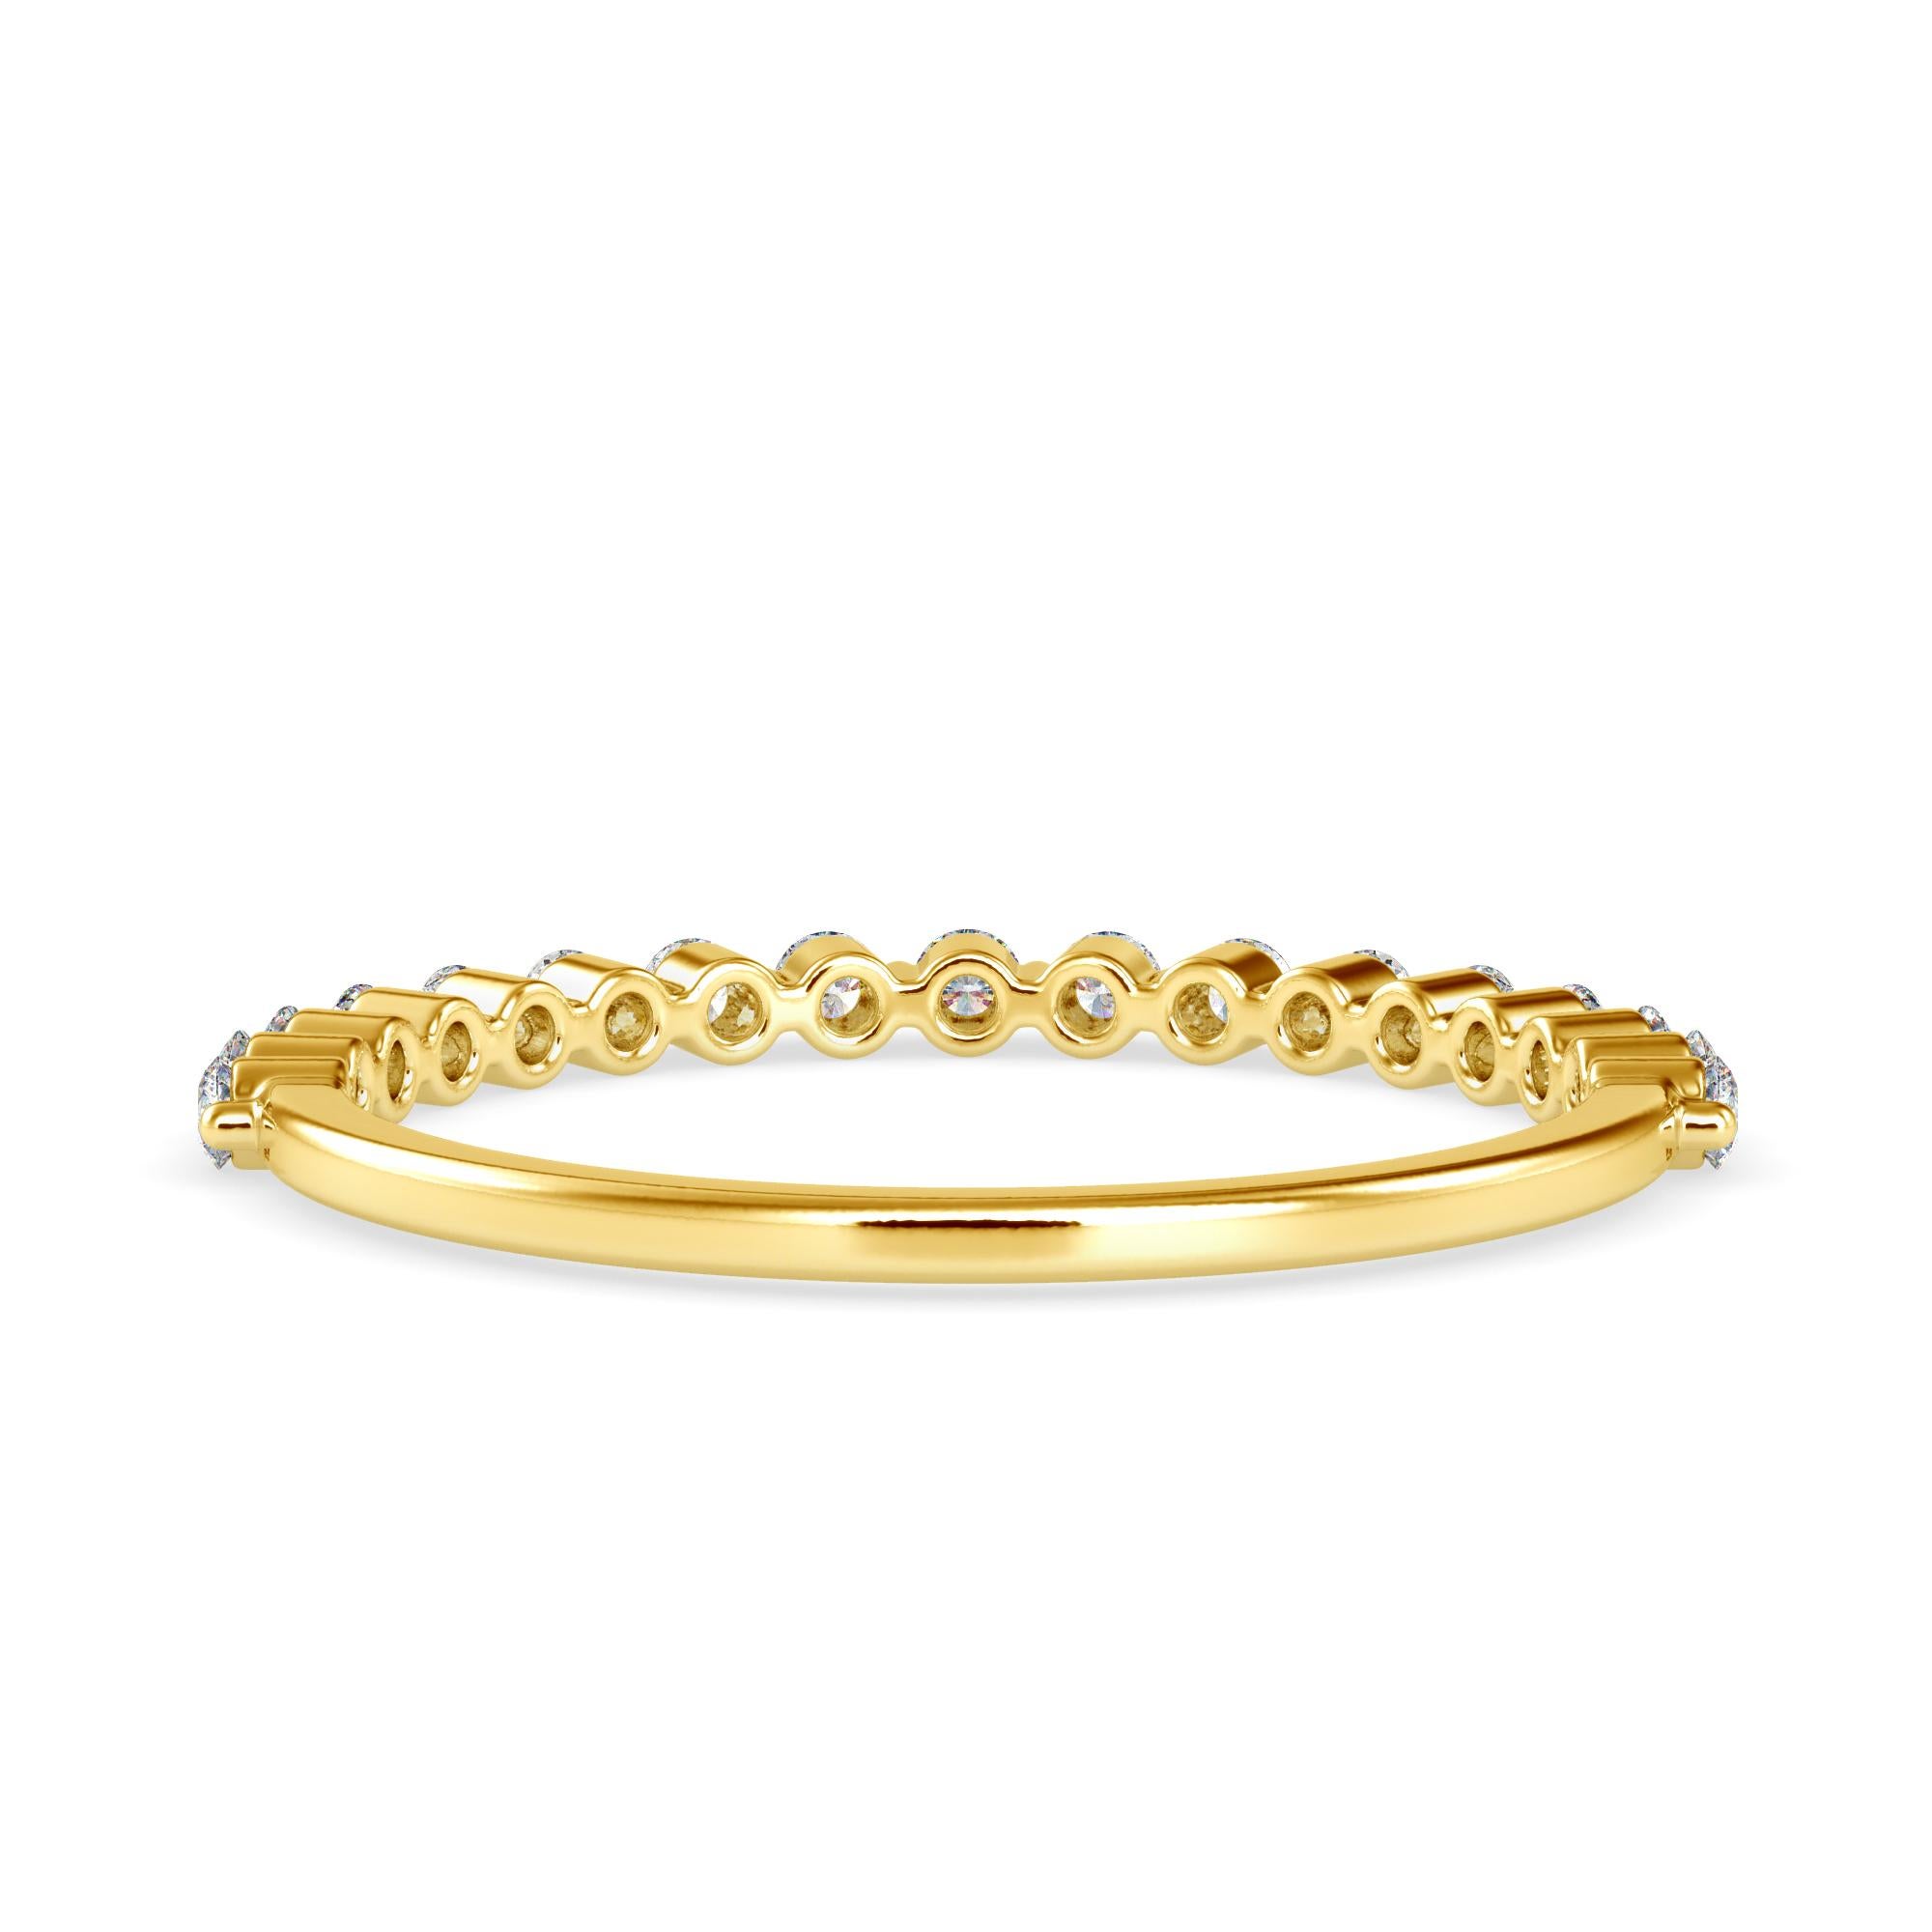 0.26 Carat Diamond 14K Yellow Gold Ring
Stamped: 14K 
Total Ring Weight: 1.3 Grams
Diamond Weight: 0.26 Carat (F-G Color, VS2-SI1 Clarity) 1.6 Millimeters 
Diamond Quantity: 17 
SKU: [500030]